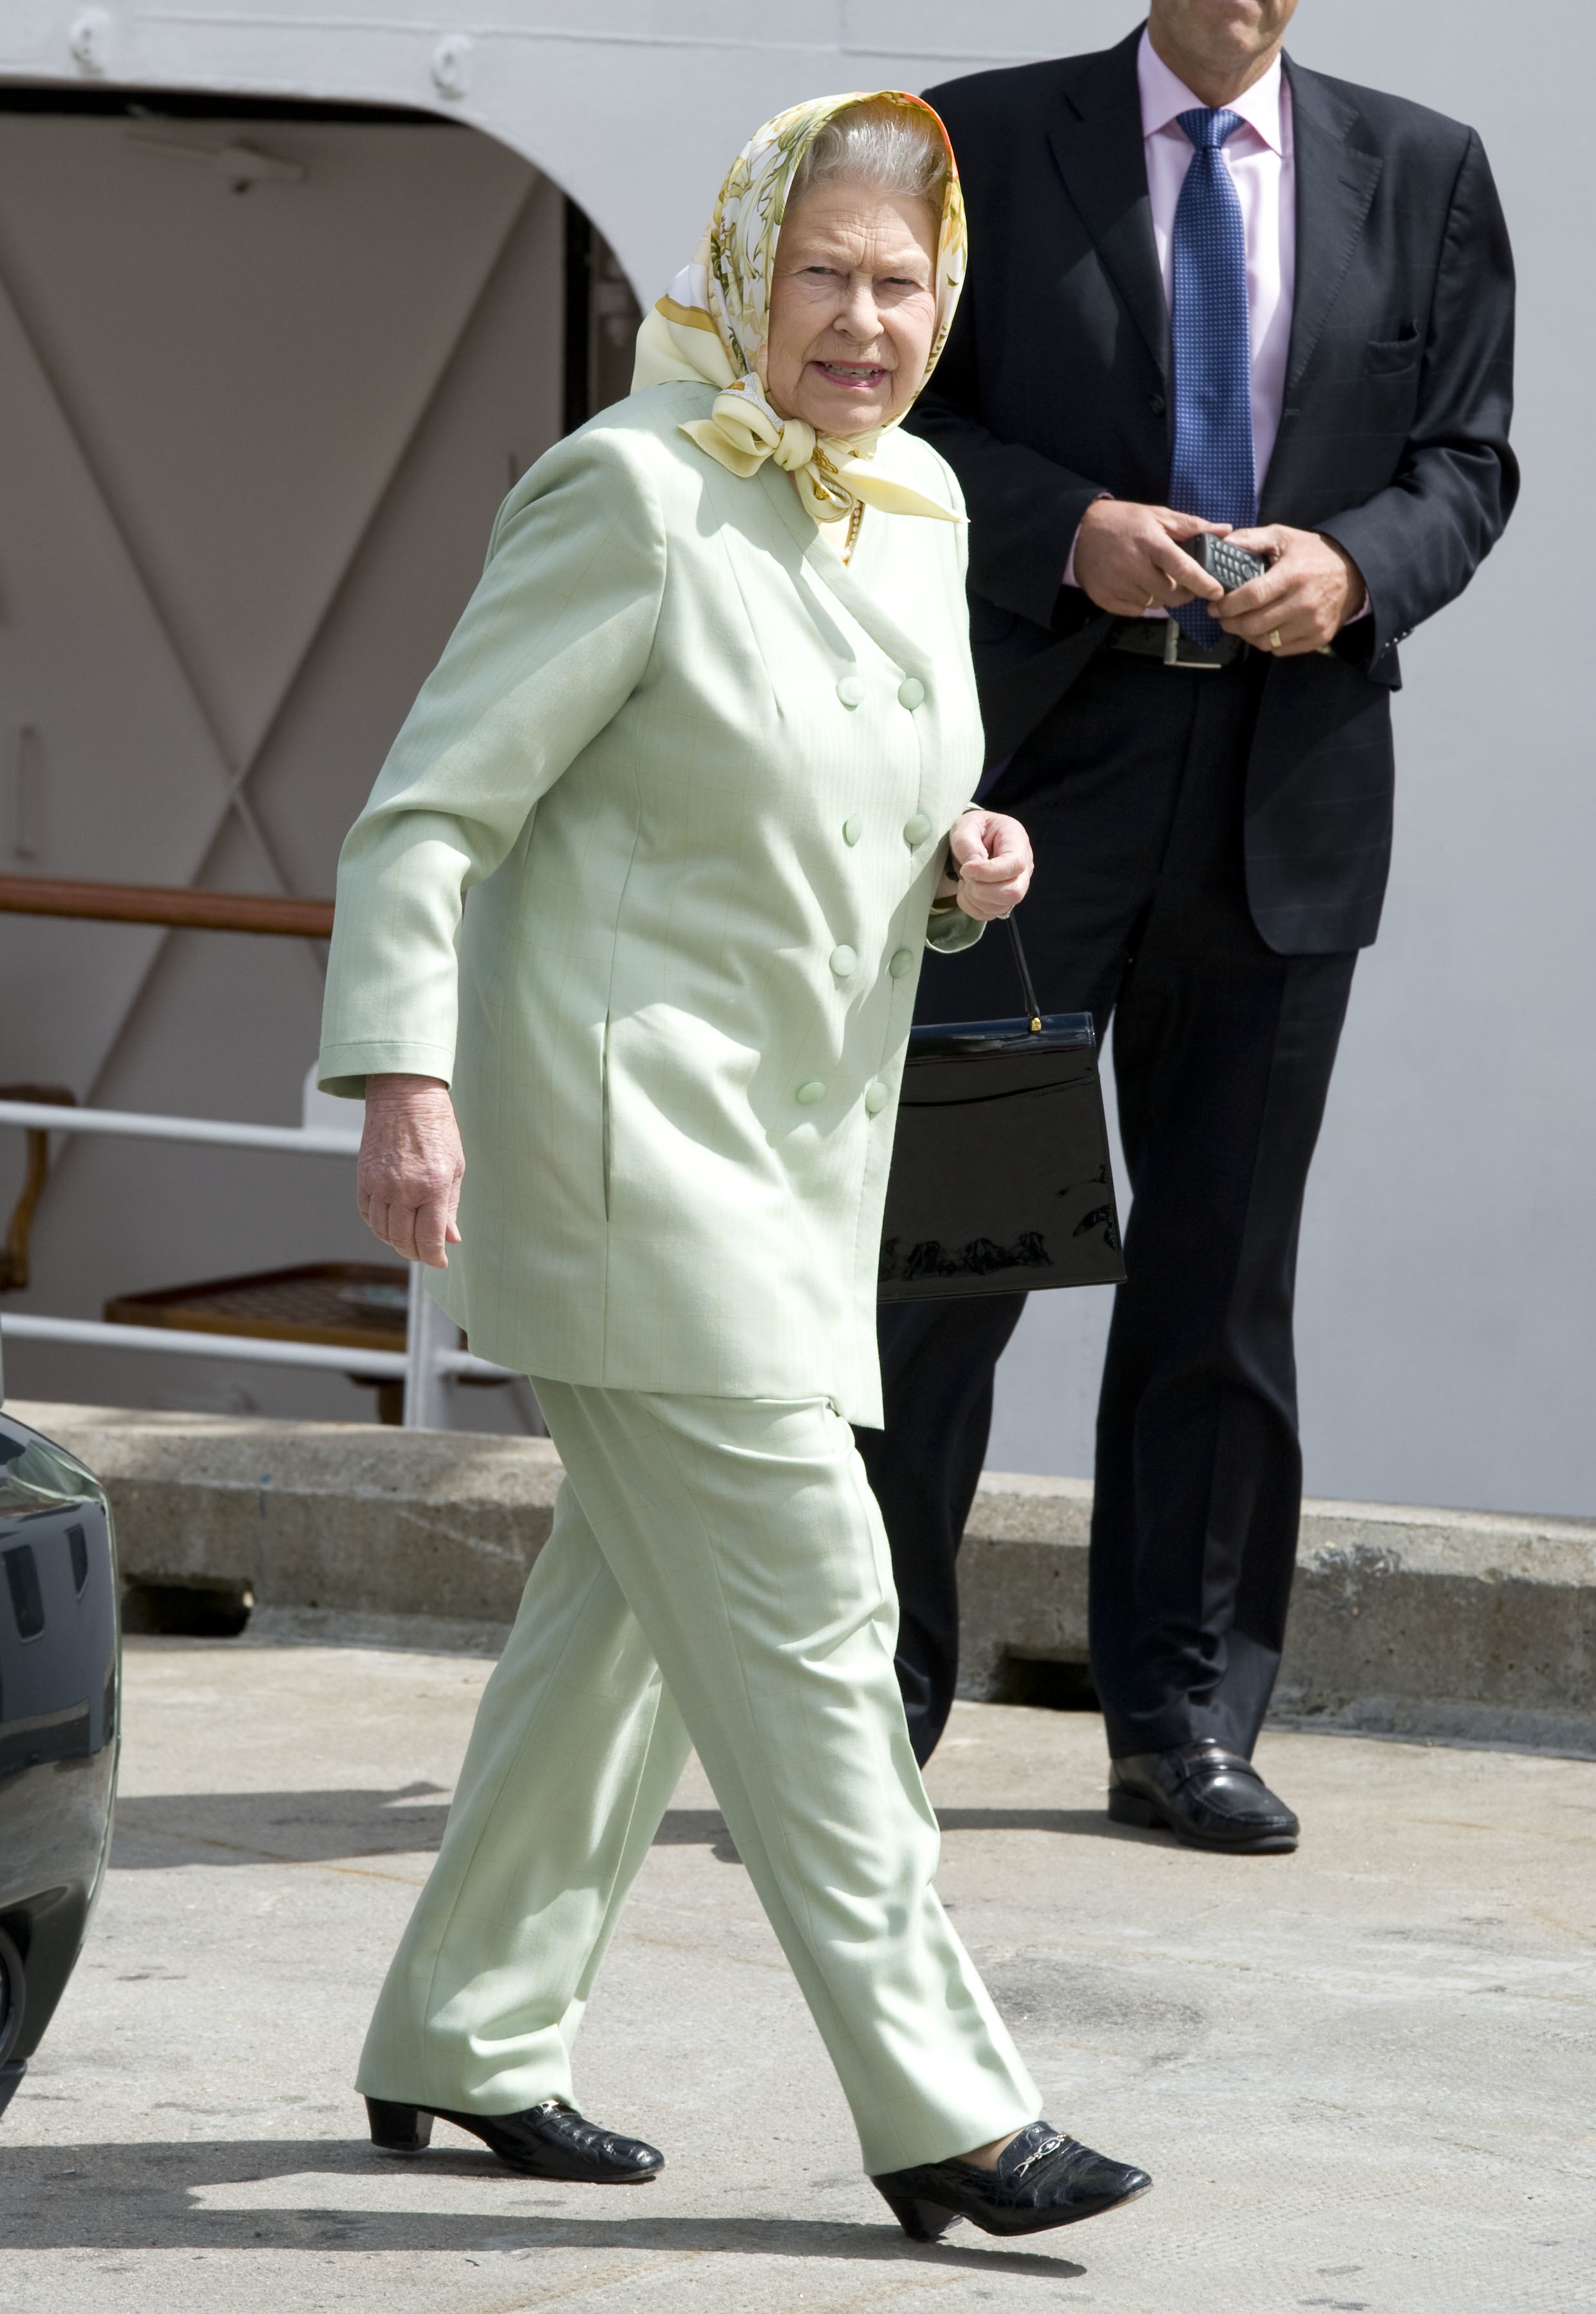 <p>A rare sight indeed! Queen Elizabeth II wore pants in public as she joined other members of the royal family to start a two-week cruise in Stornoway, Isle of Lewis, in the Outer Hebrides in Scotland on July 23, 2010. The cruise was a celebration to mark the 50th birthday of Prince Andrew and the 60th birthday of Princess Anne.</p>